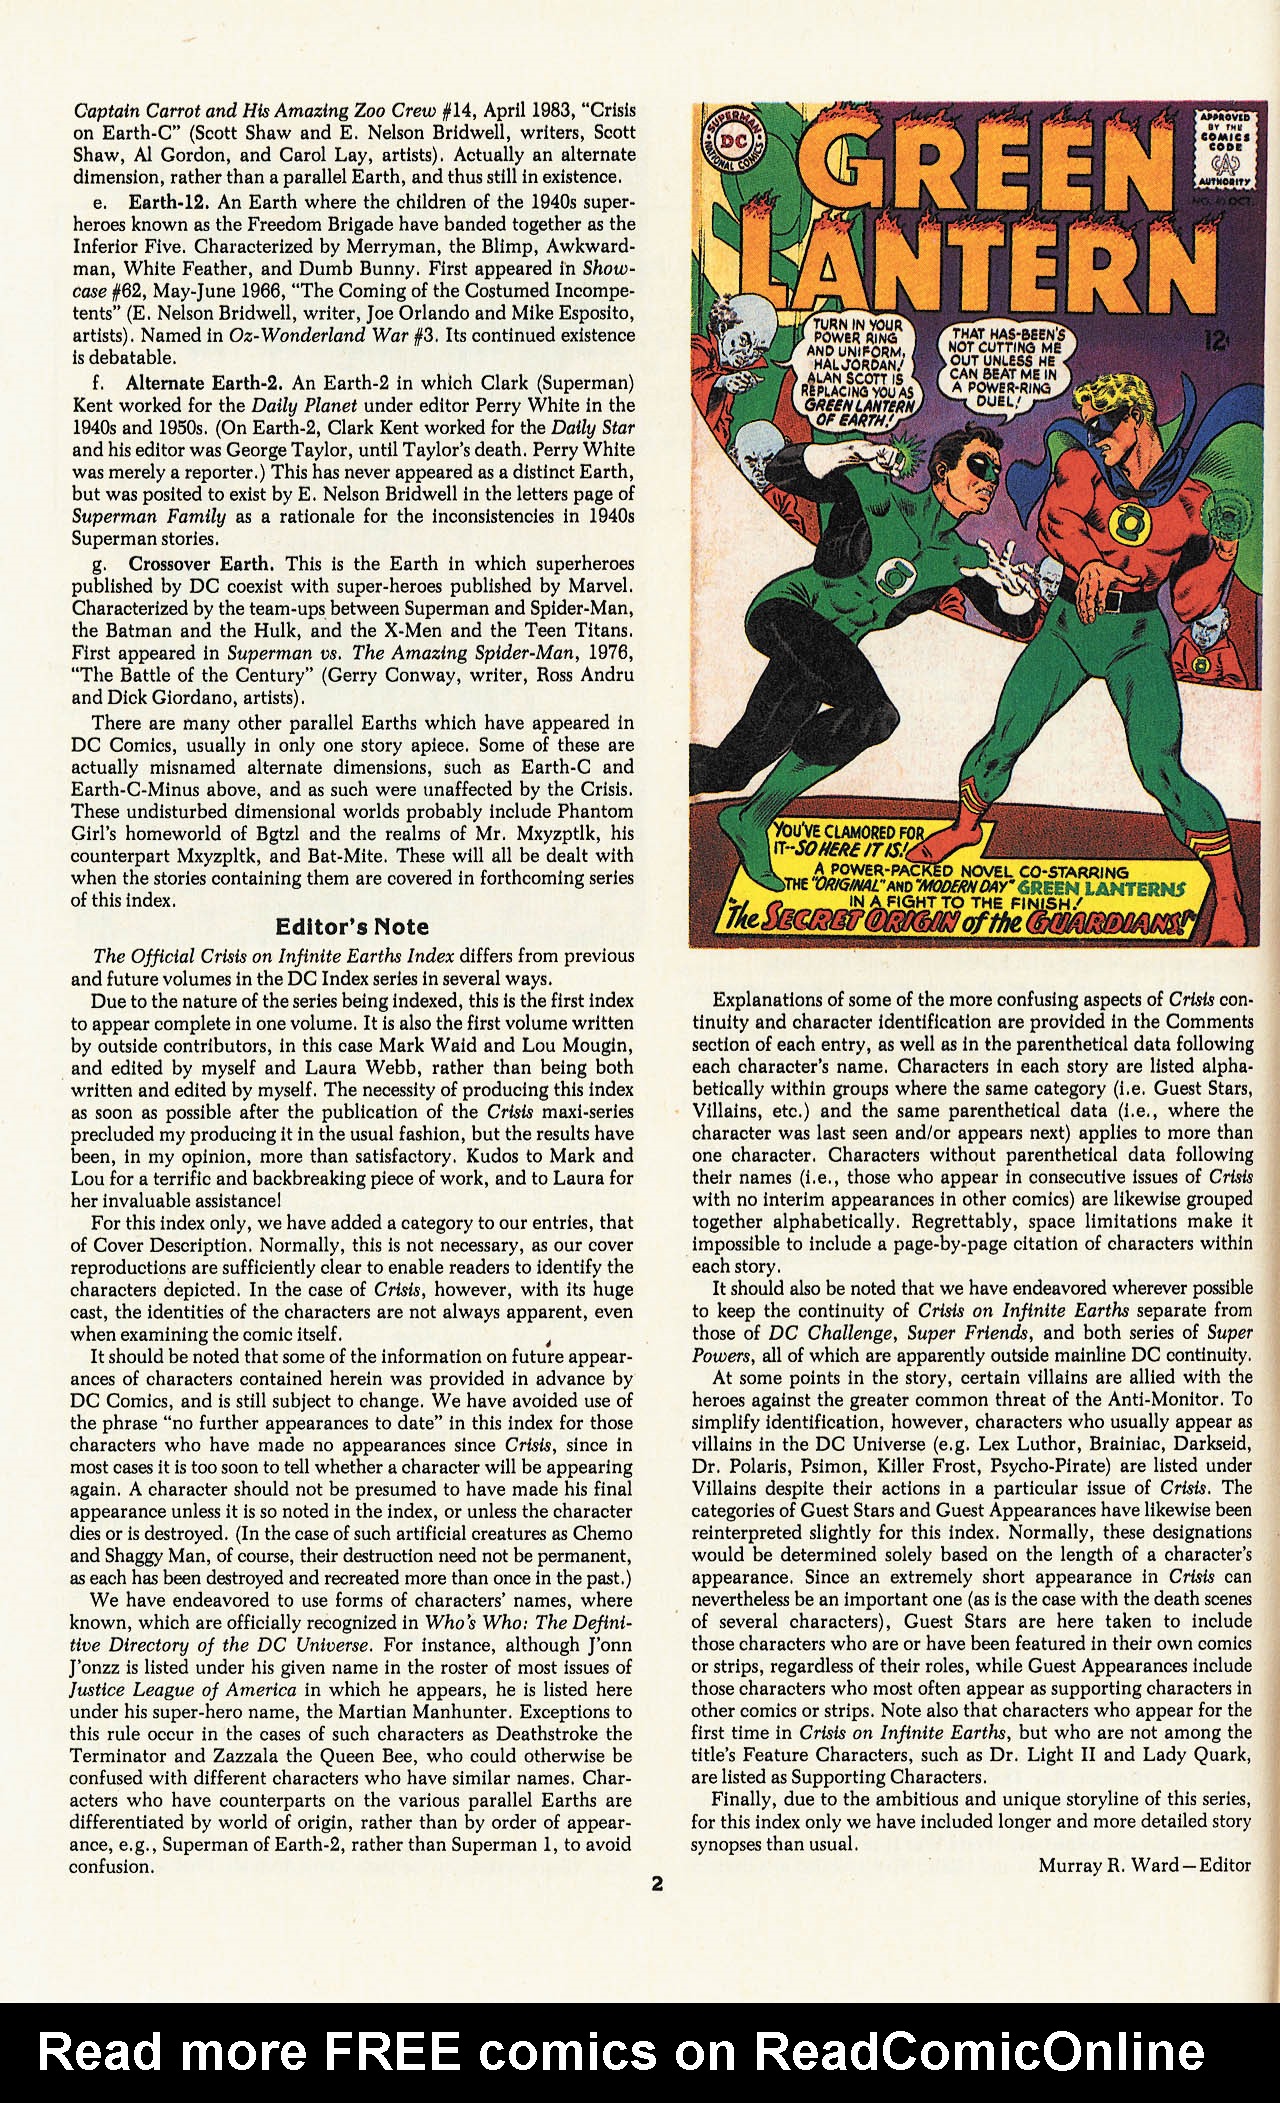 Read online The Official Crisis on Infinite Earths Index comic -  Issue # Full - 4